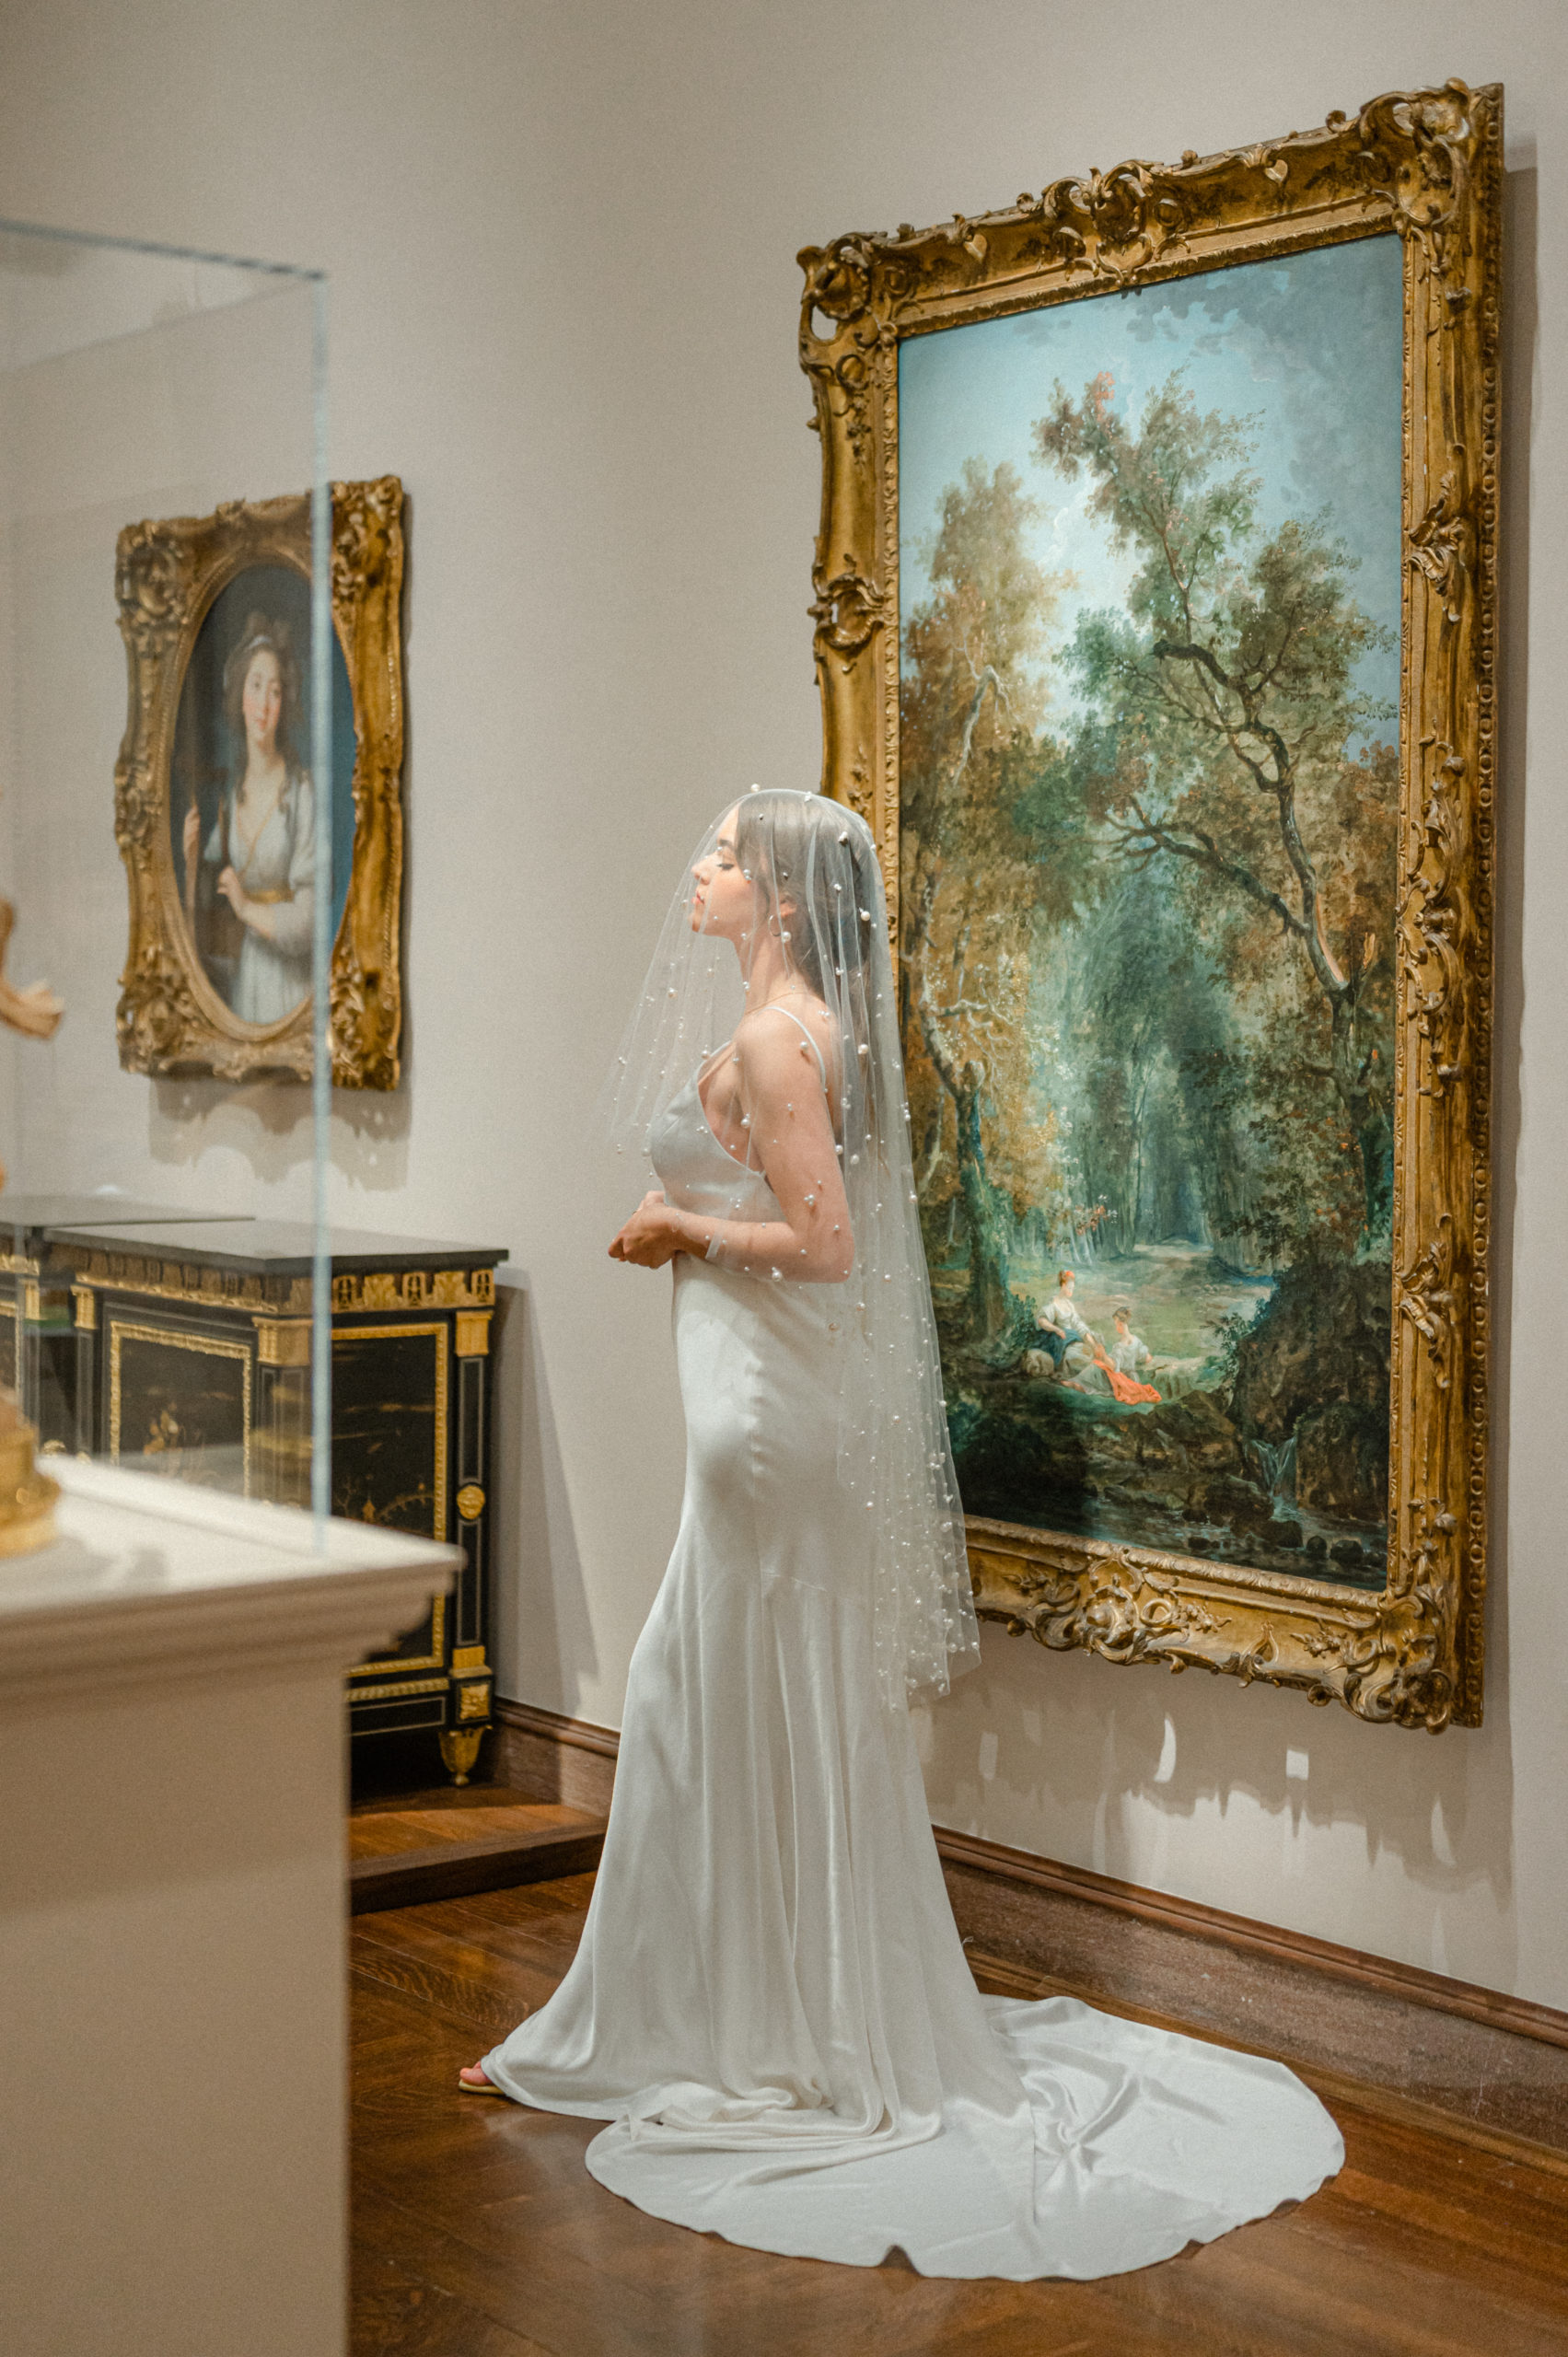 Bridal portrait inside the Cincinnati Art Museum. Bride is wearing a fitted dress with long train and a pearl veil over her head.